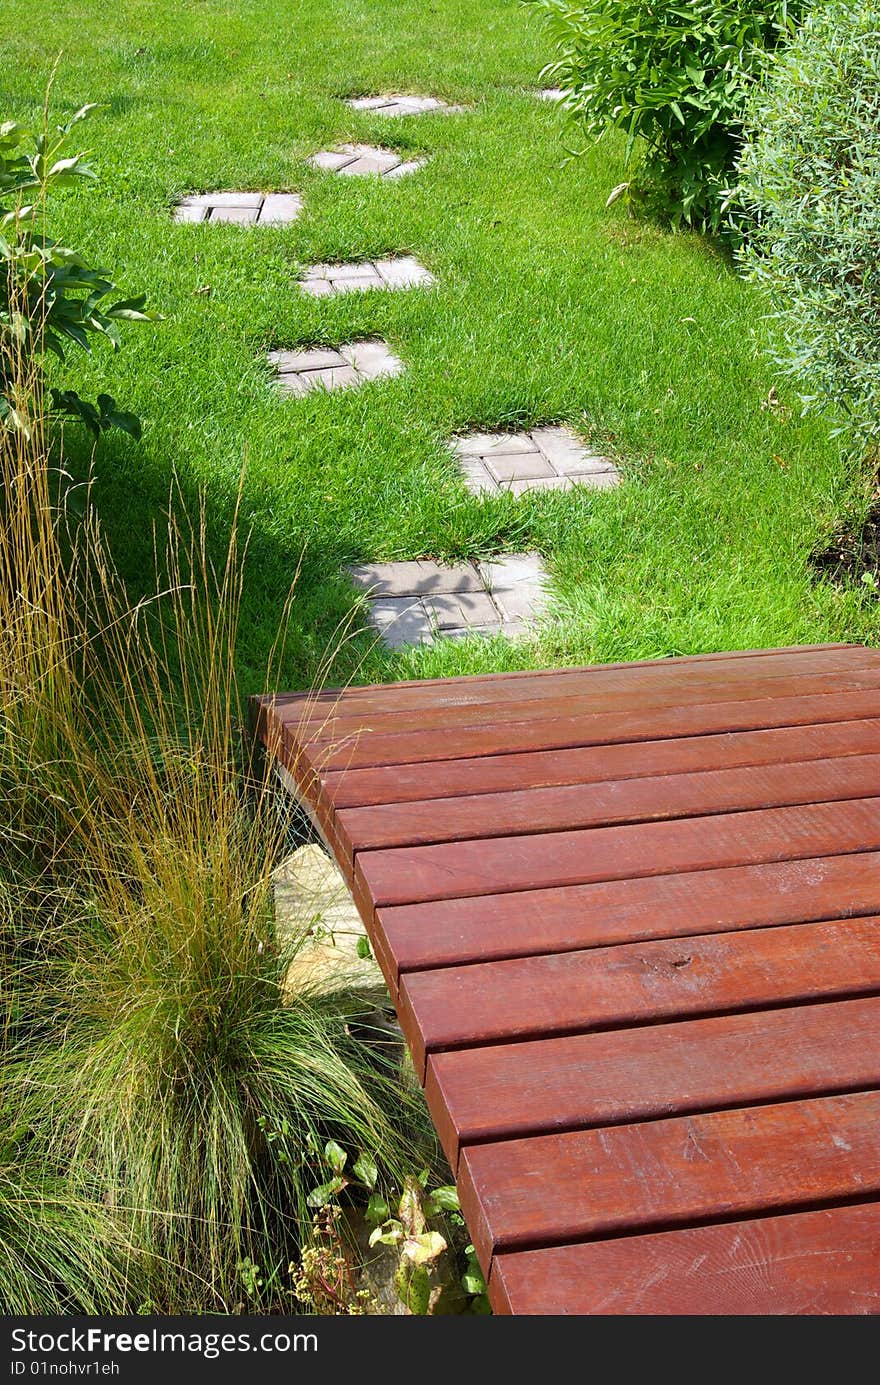 Garden stone path with grass growing up between the stones